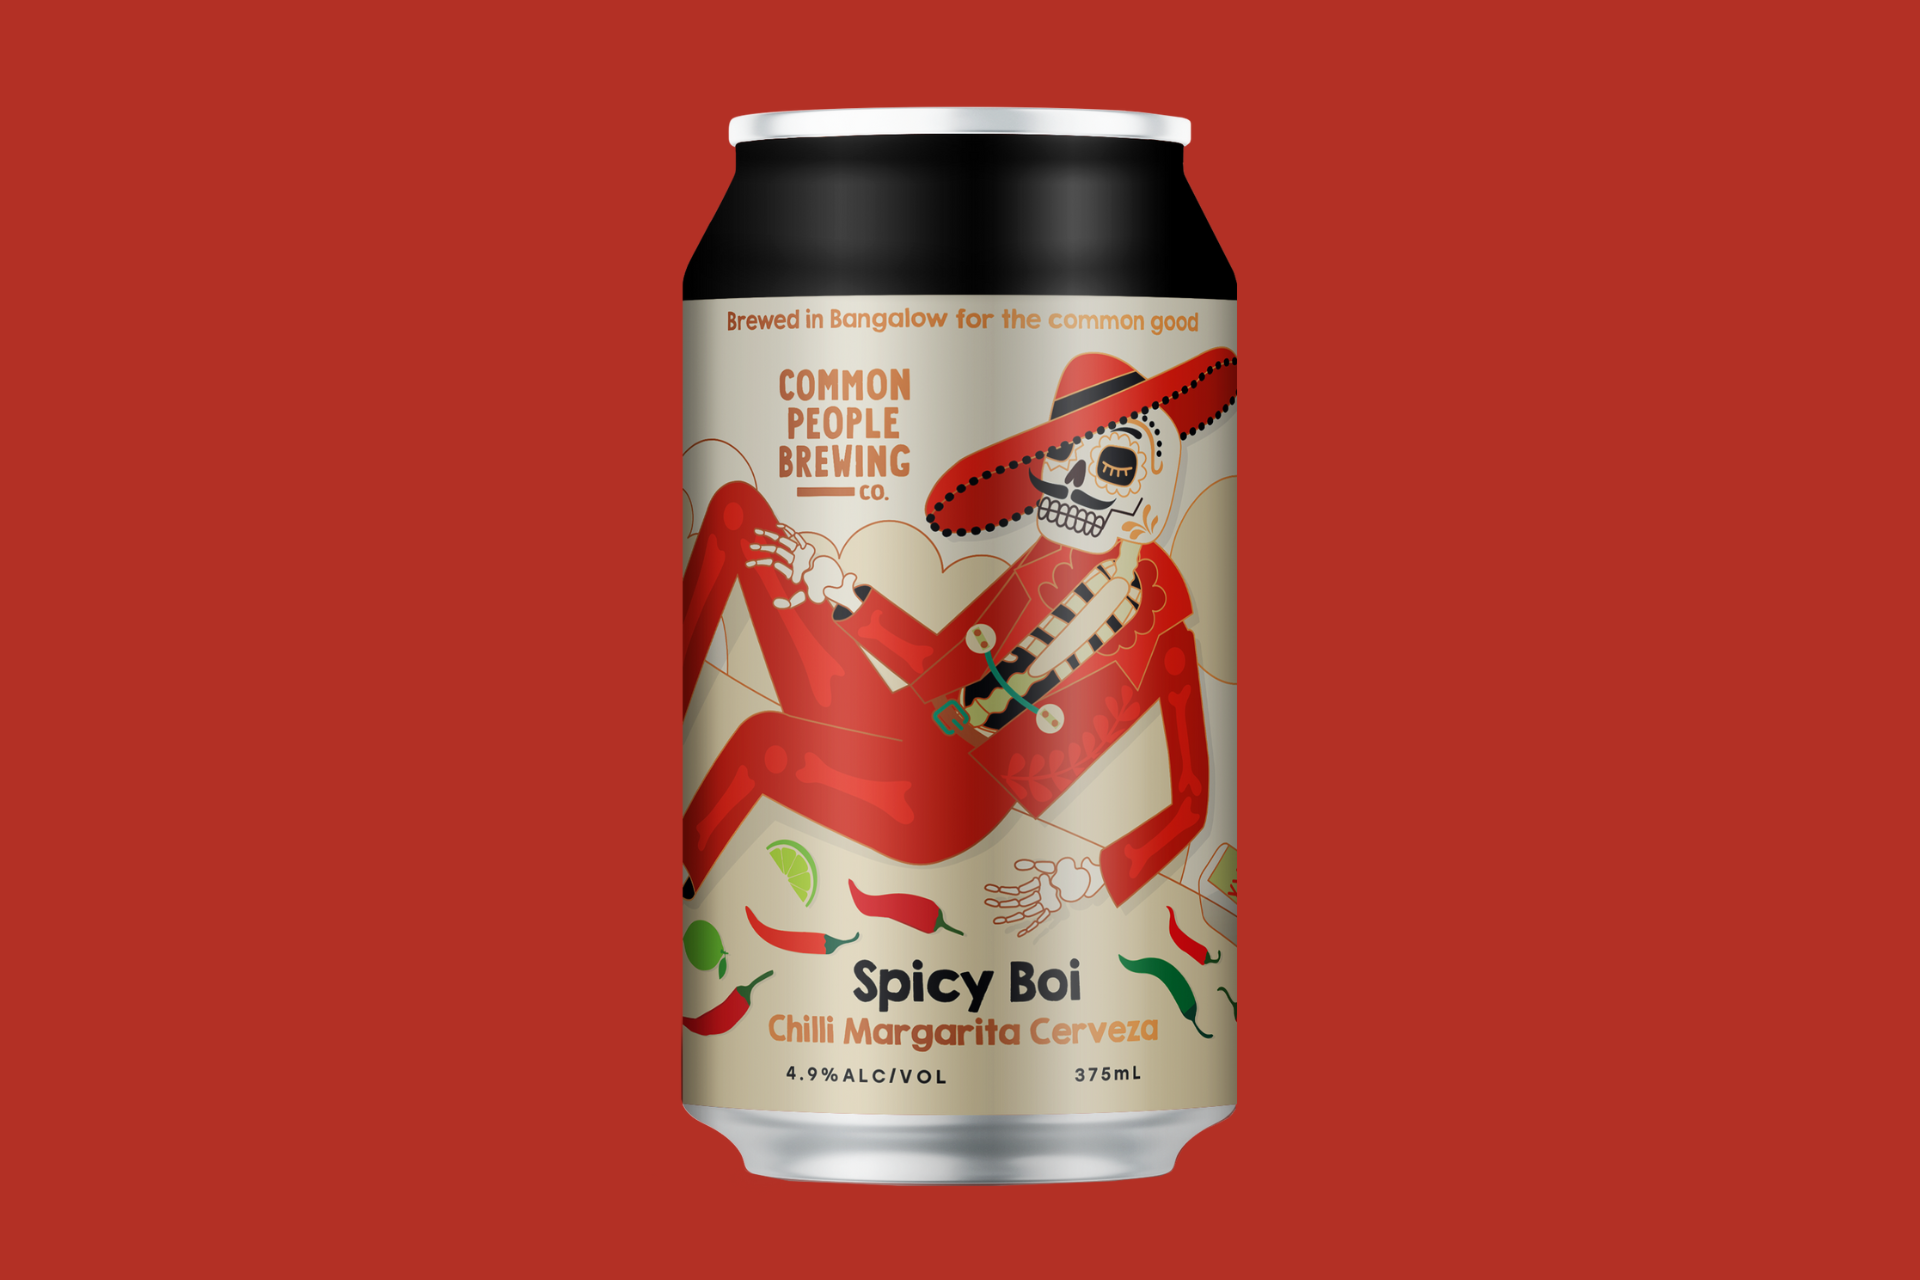 Meet Spicy Boi - our hottest new creation!